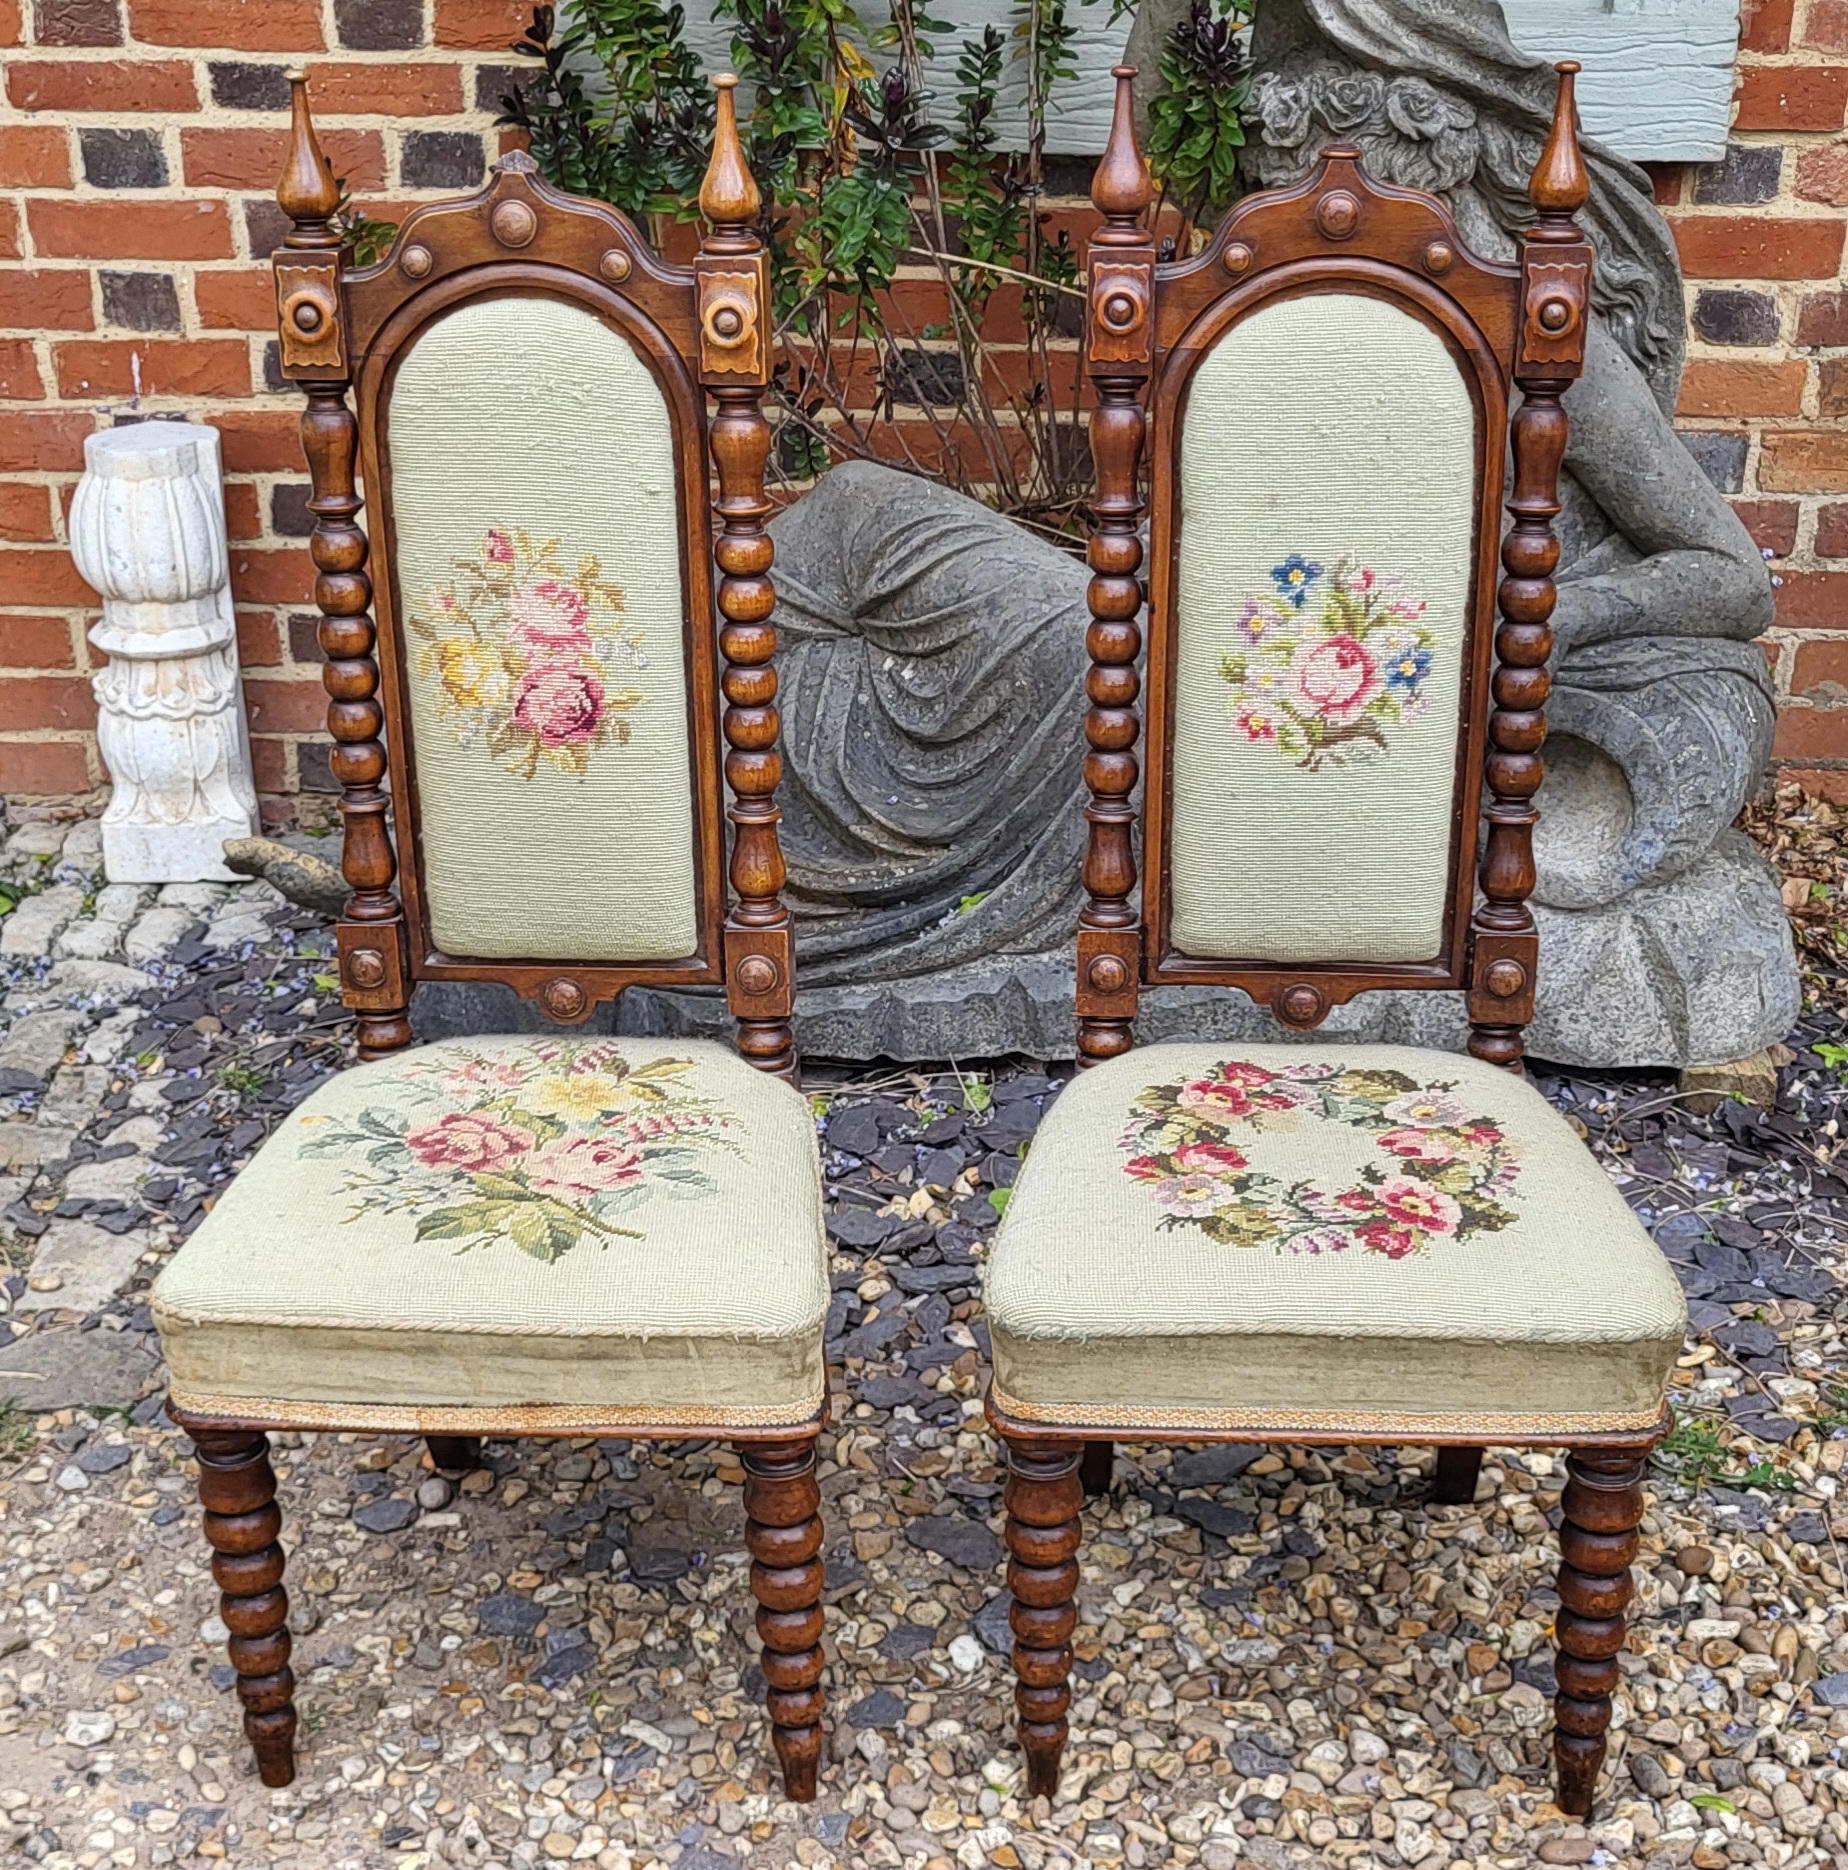 A PAIR OF VICTORIAN MAHOGANY PRIEDIEU CHAIRS With tapestry upholstery on carved Gothic design - Image 2 of 5